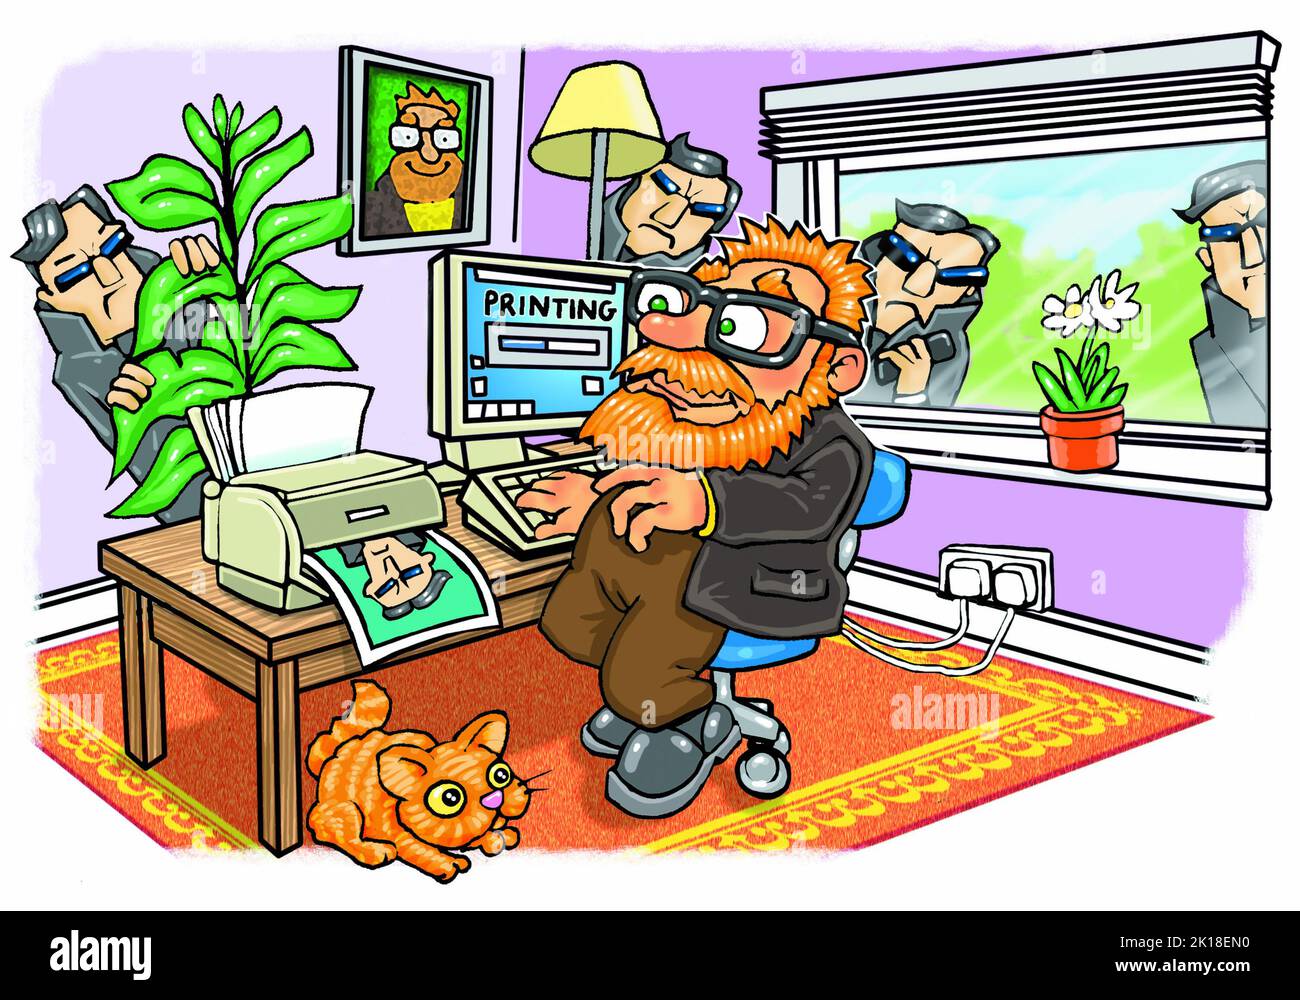 Cartoon art illustrating the idea of spyware /malware that hides on your PC, monitors your activity, to steal sensitive information like bank details. Stock Photo